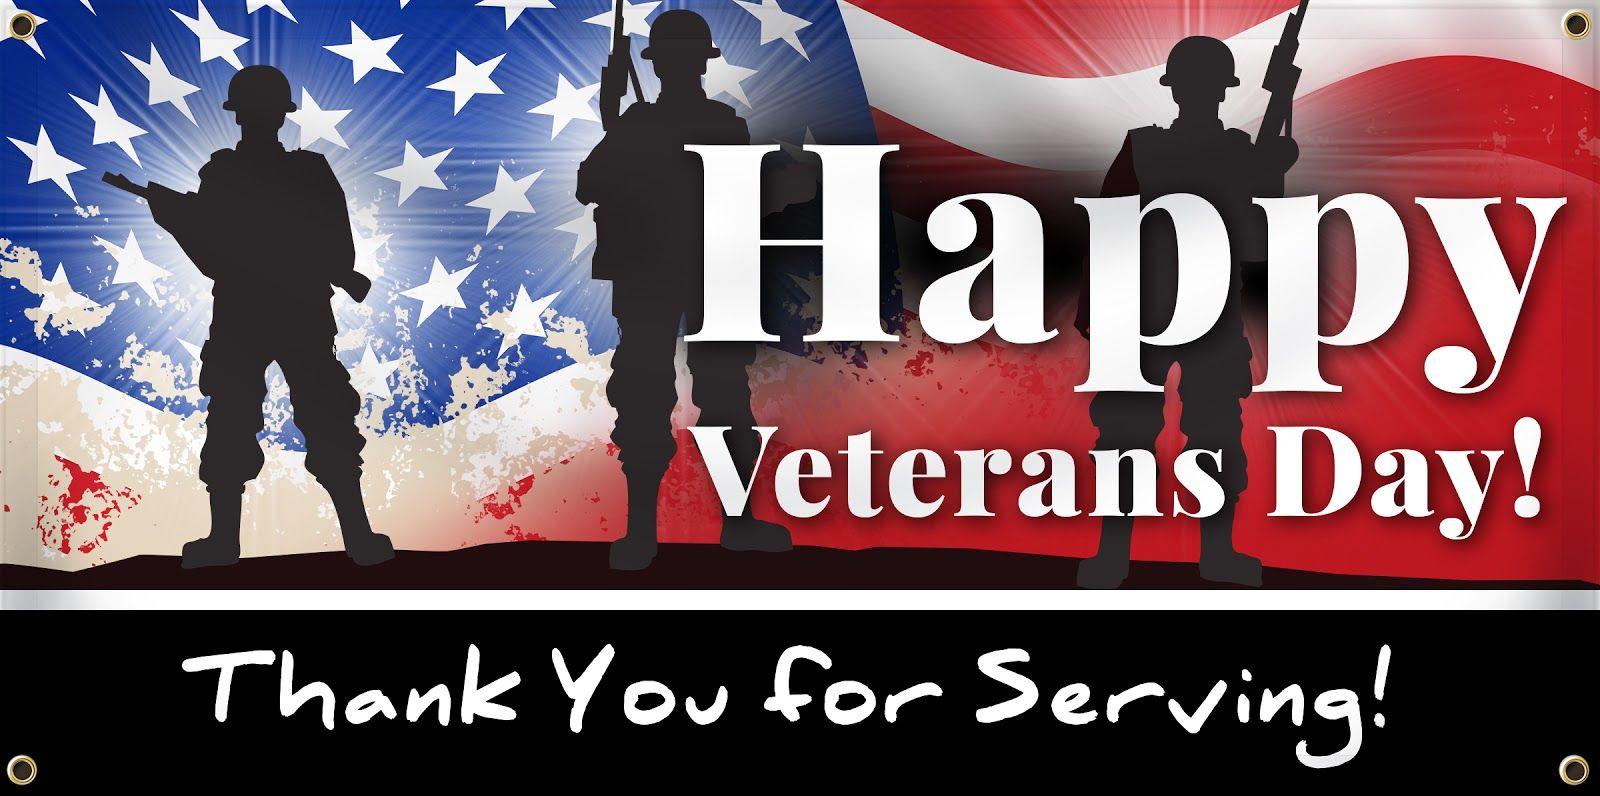 17* Veterans Day Poster & Banners Ideas for Facebook. Happy